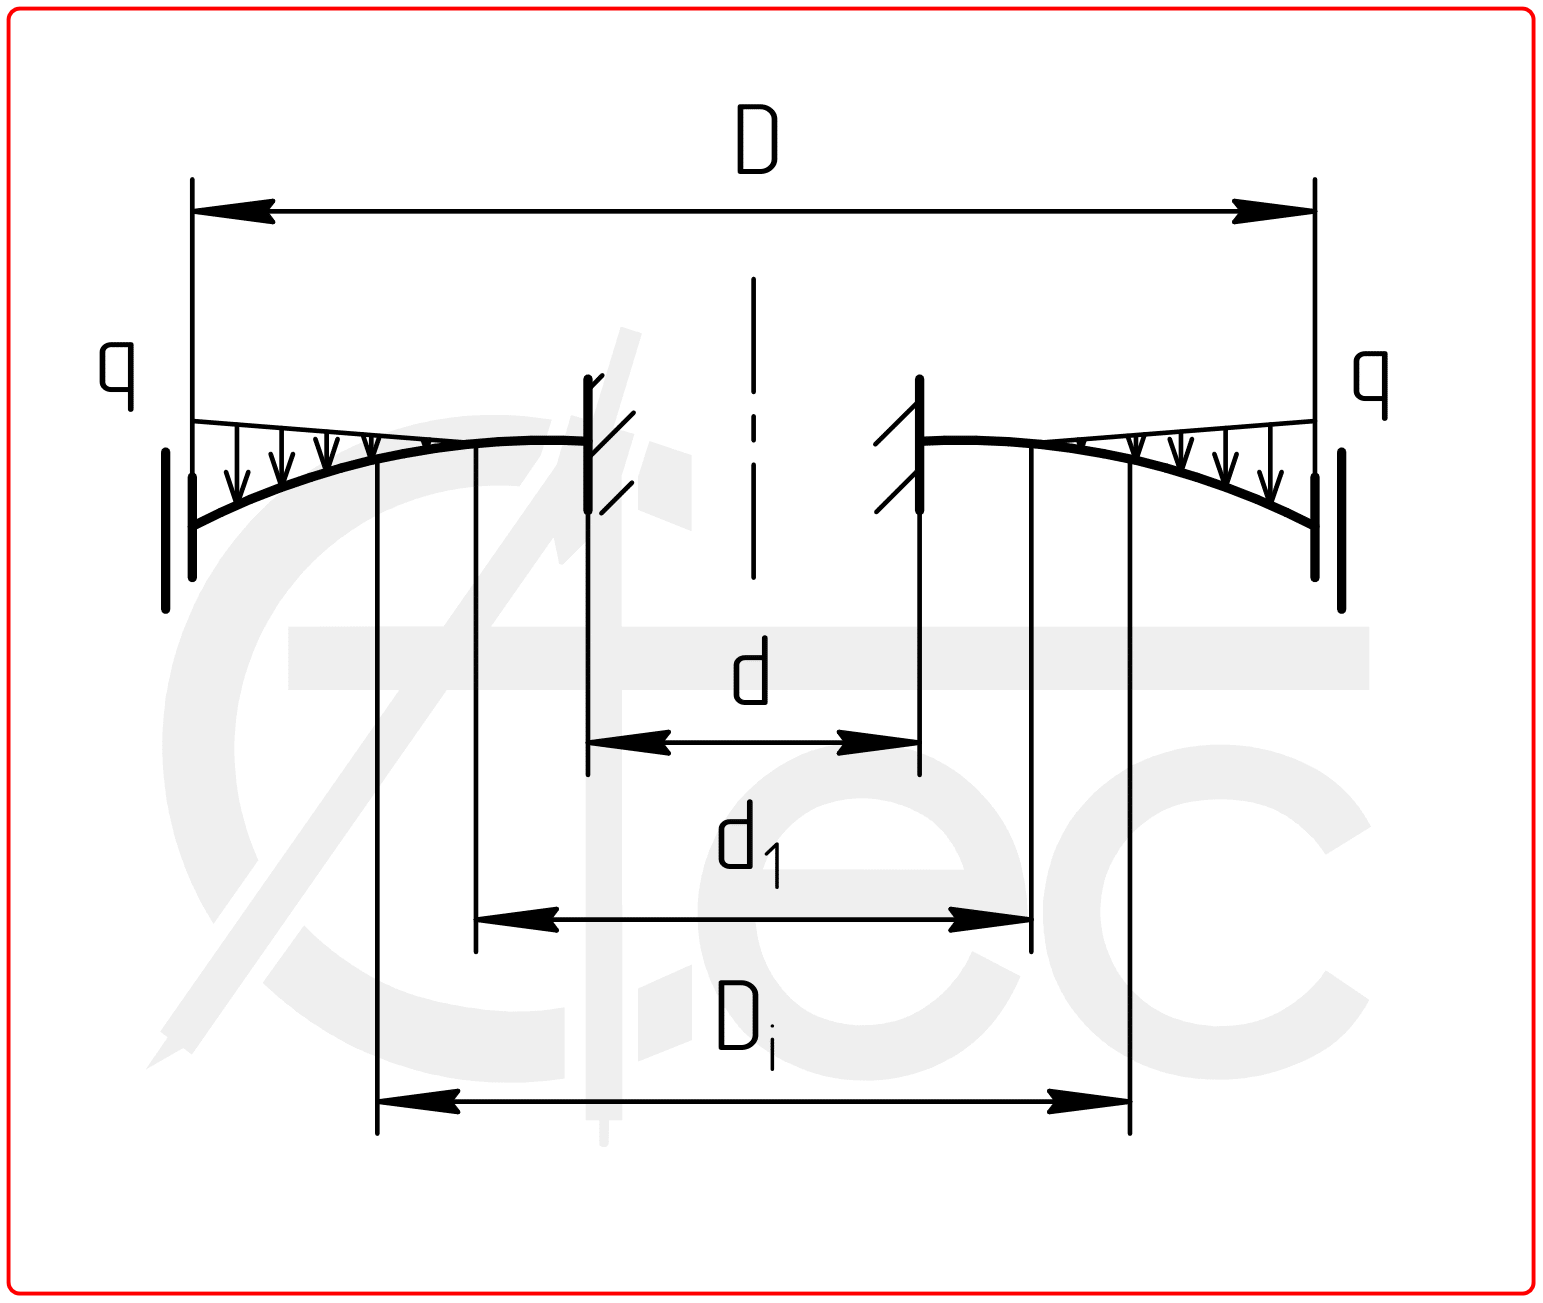 Circle plate with outer edge slided and inner edge fixed under distributed load